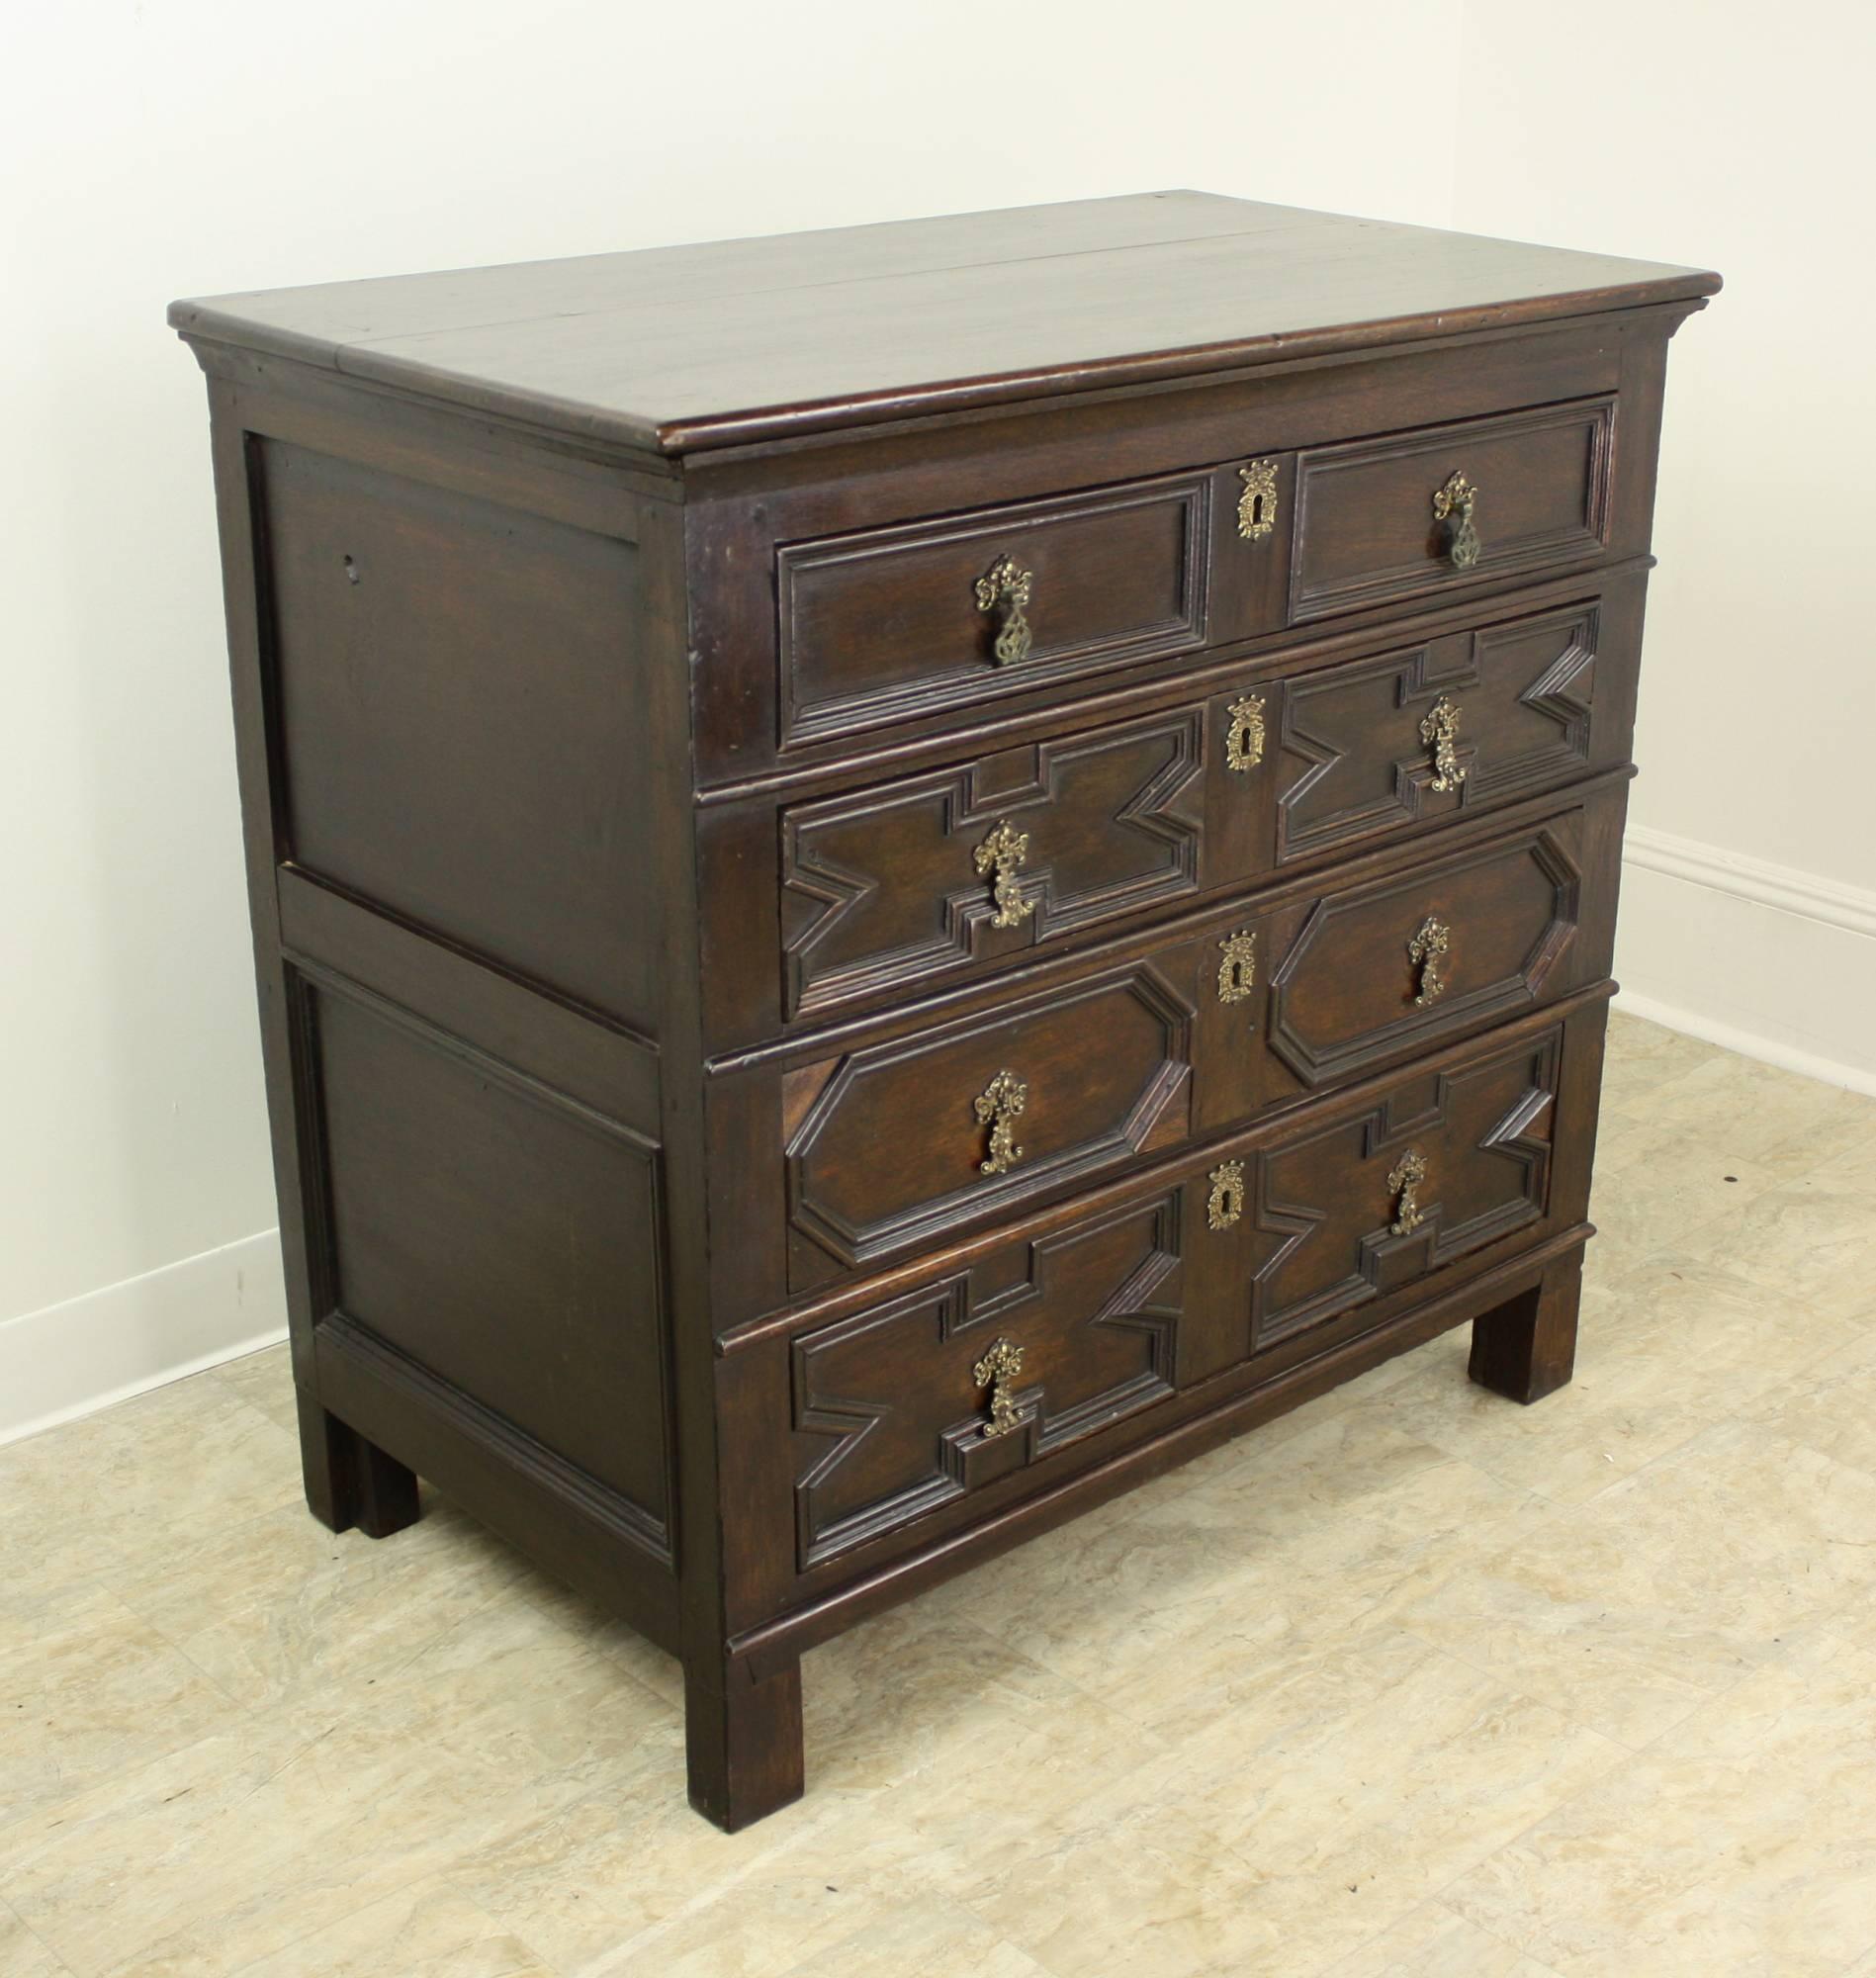 In the Jacobean style, this very early oak piece dates from the mid-1700s, and presents considerable style and character. Diagonal patterns on the faces of the front drawer are typical of the period and are always an outstanding feature. Drawer